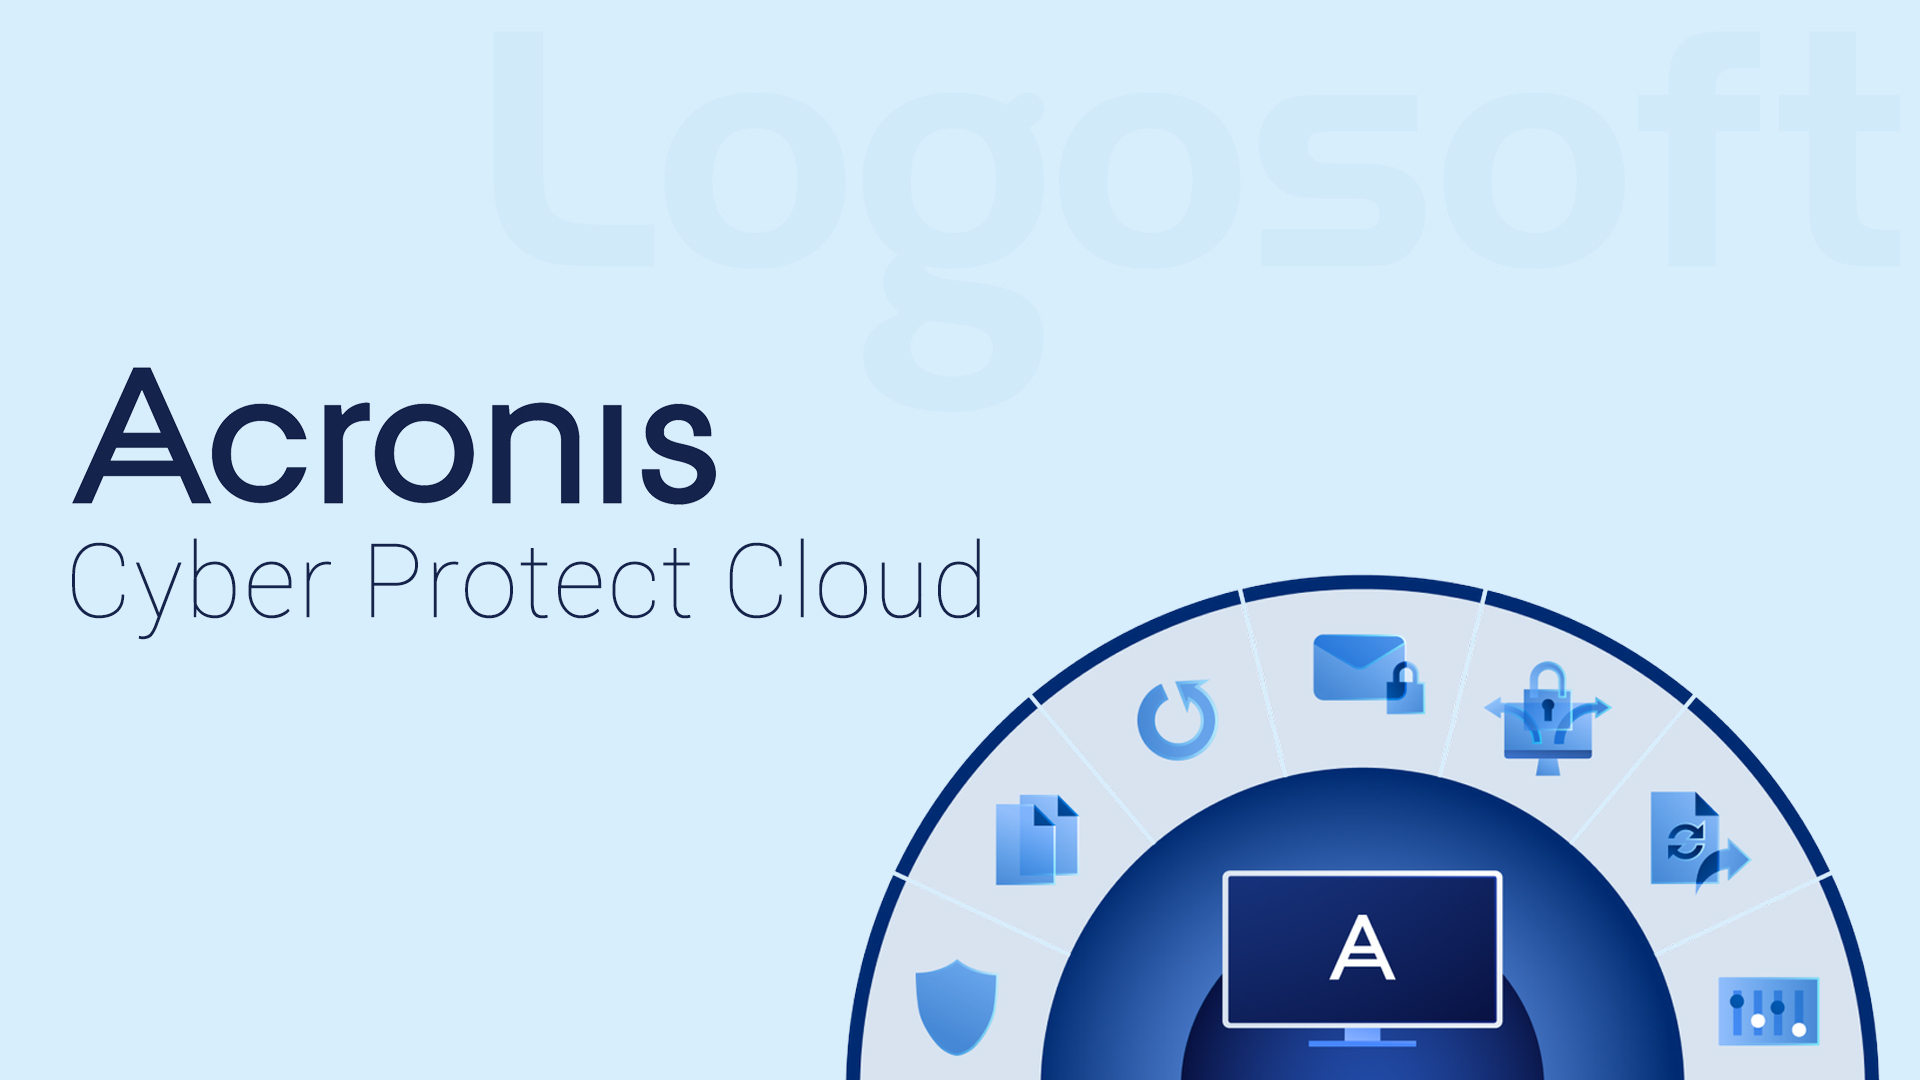 Acronis Cyber Protect Cloud Licensing Model